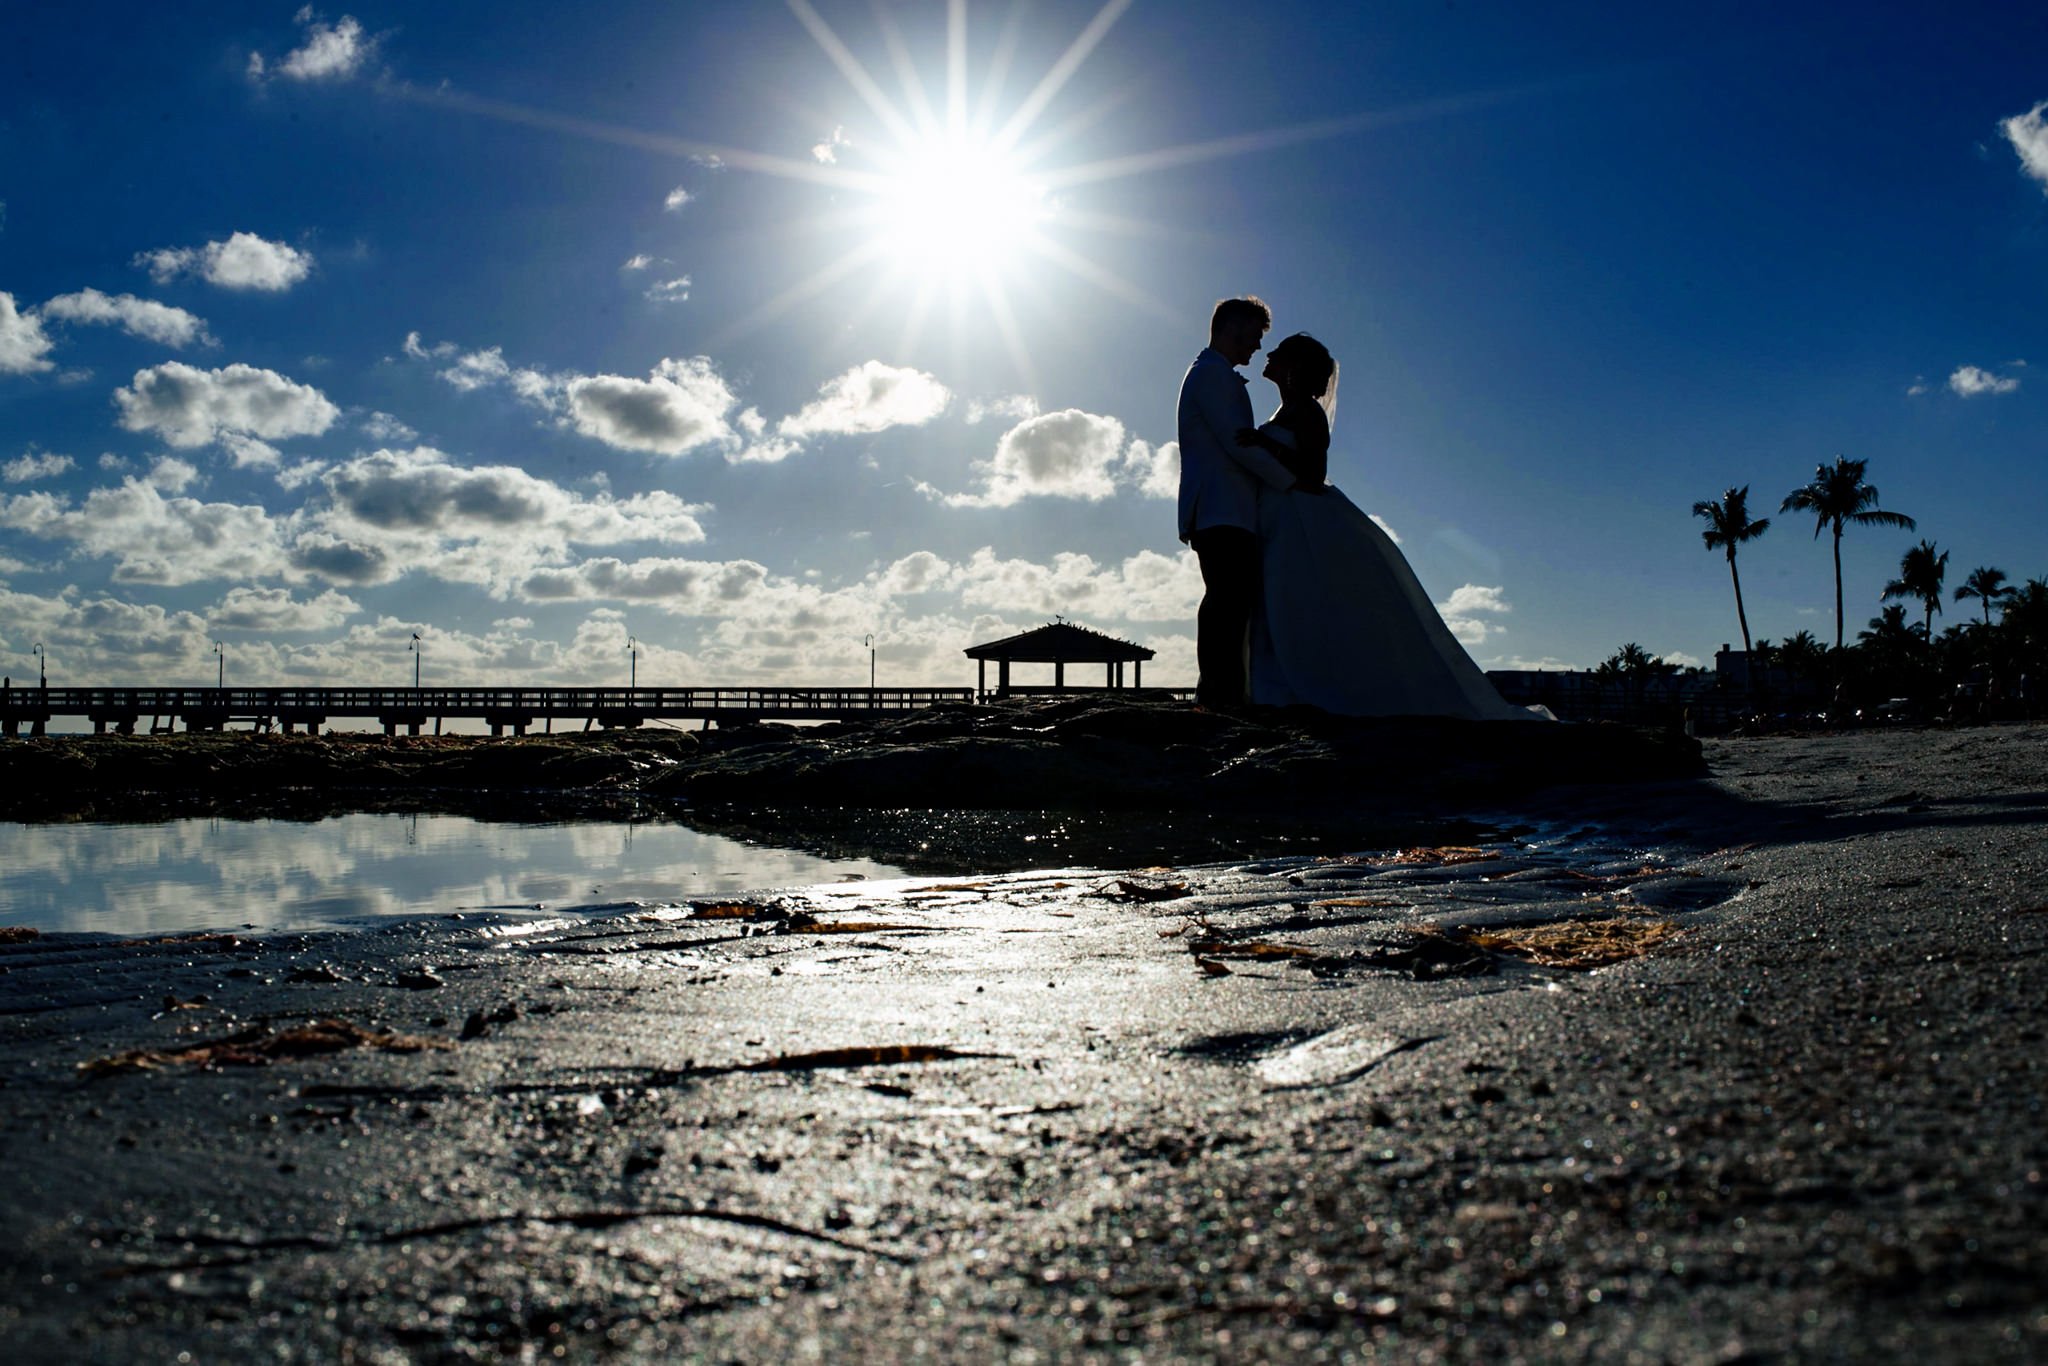 An Asheville, NC wedding photographer captures a beautiful bride and groom standing on a beach with the sun behind them.